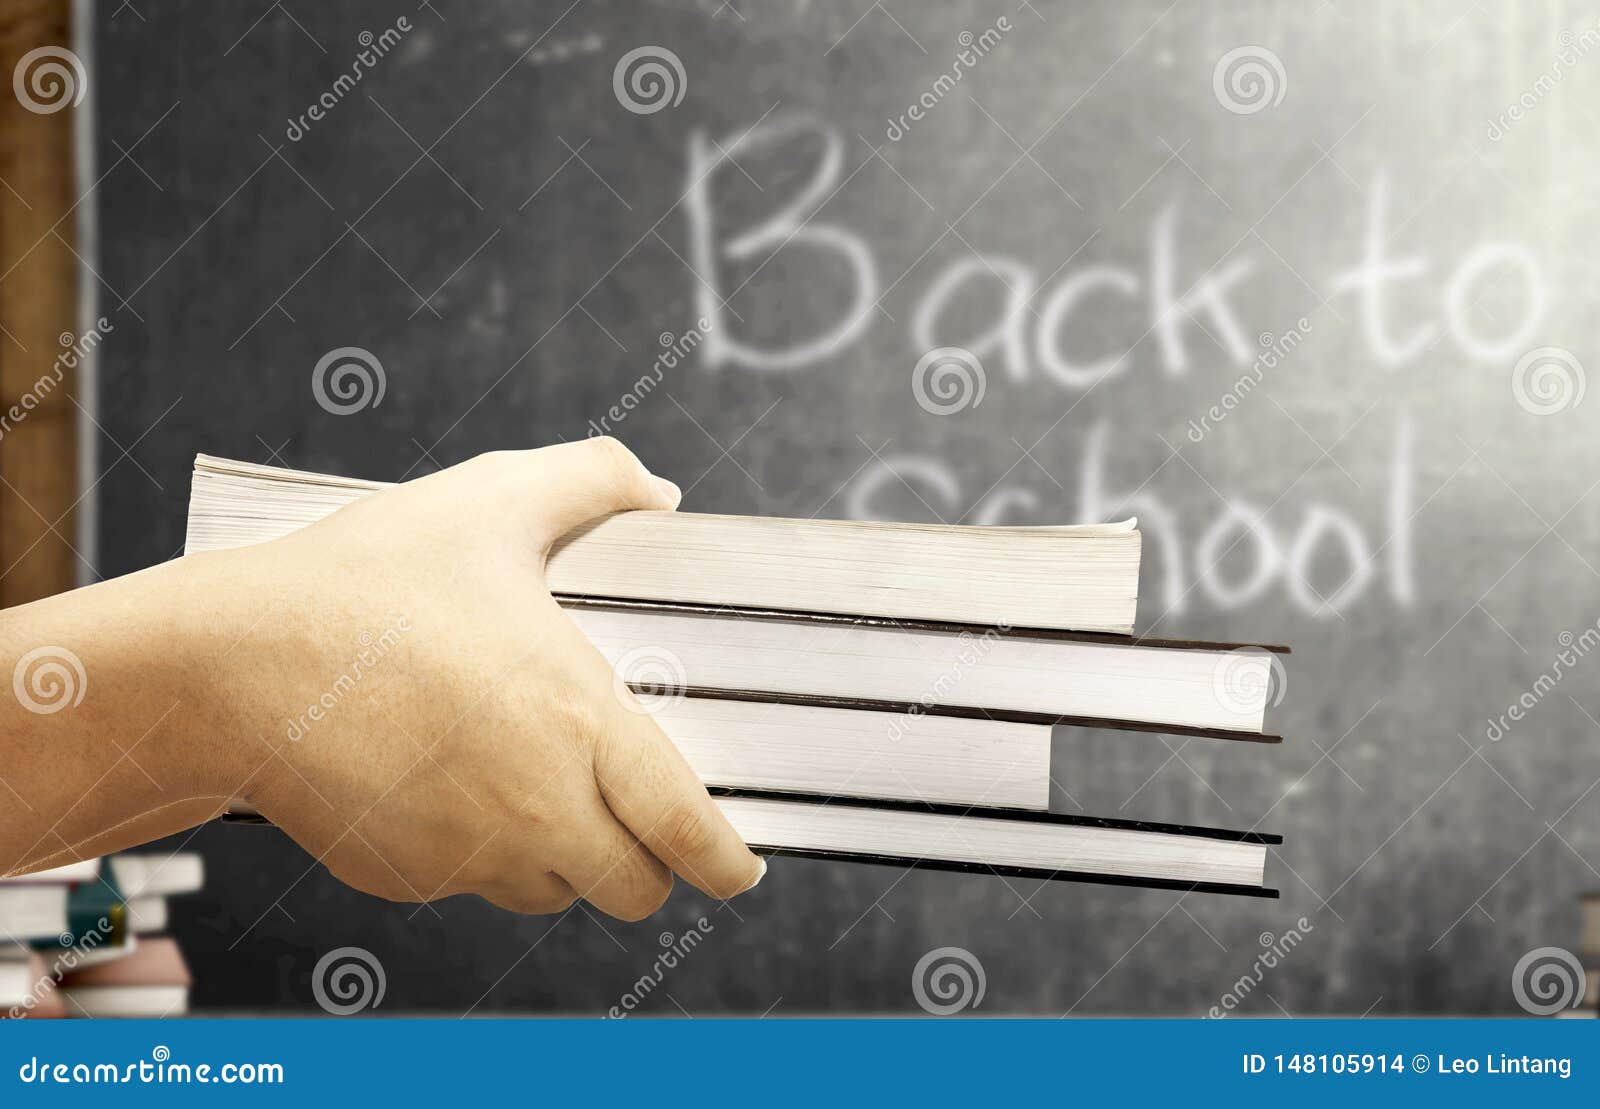 Student Hands Carrying the Pile of Books in the Classroom with Blackboard  Background Stock Photo - Image of indoors, knowledge: 148105914